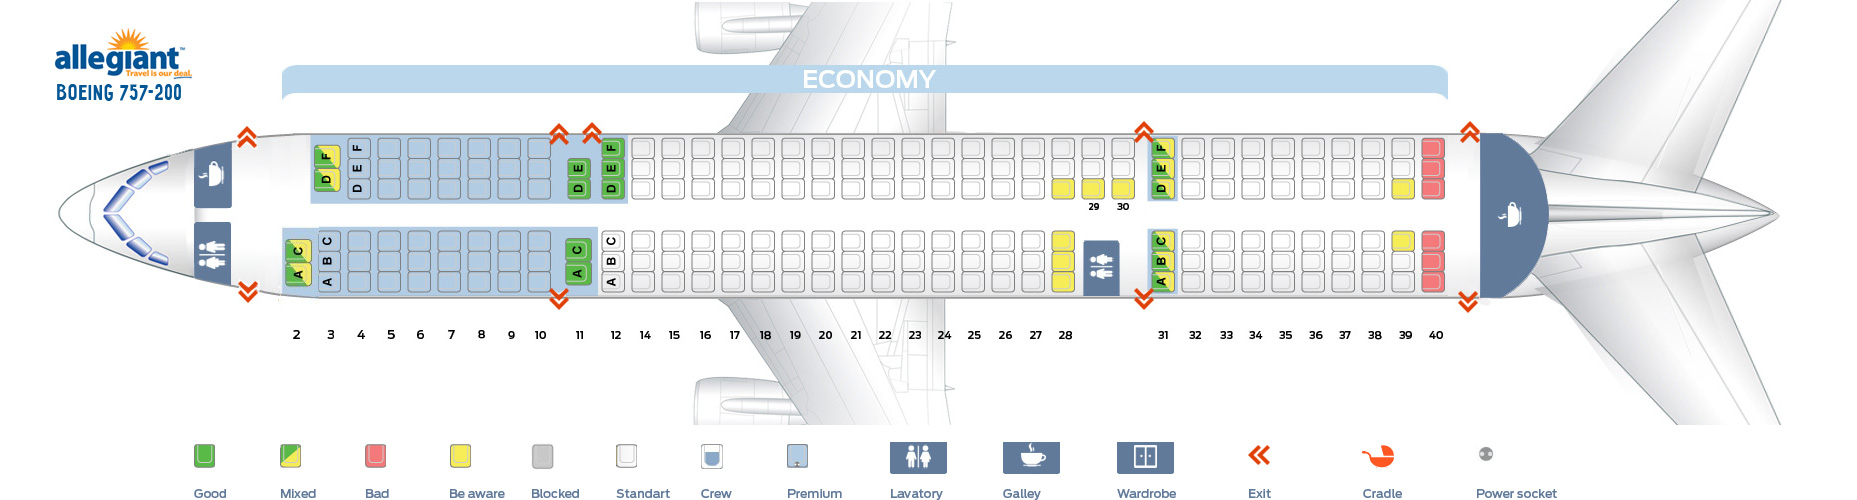 Boeing 757 Seating Chart